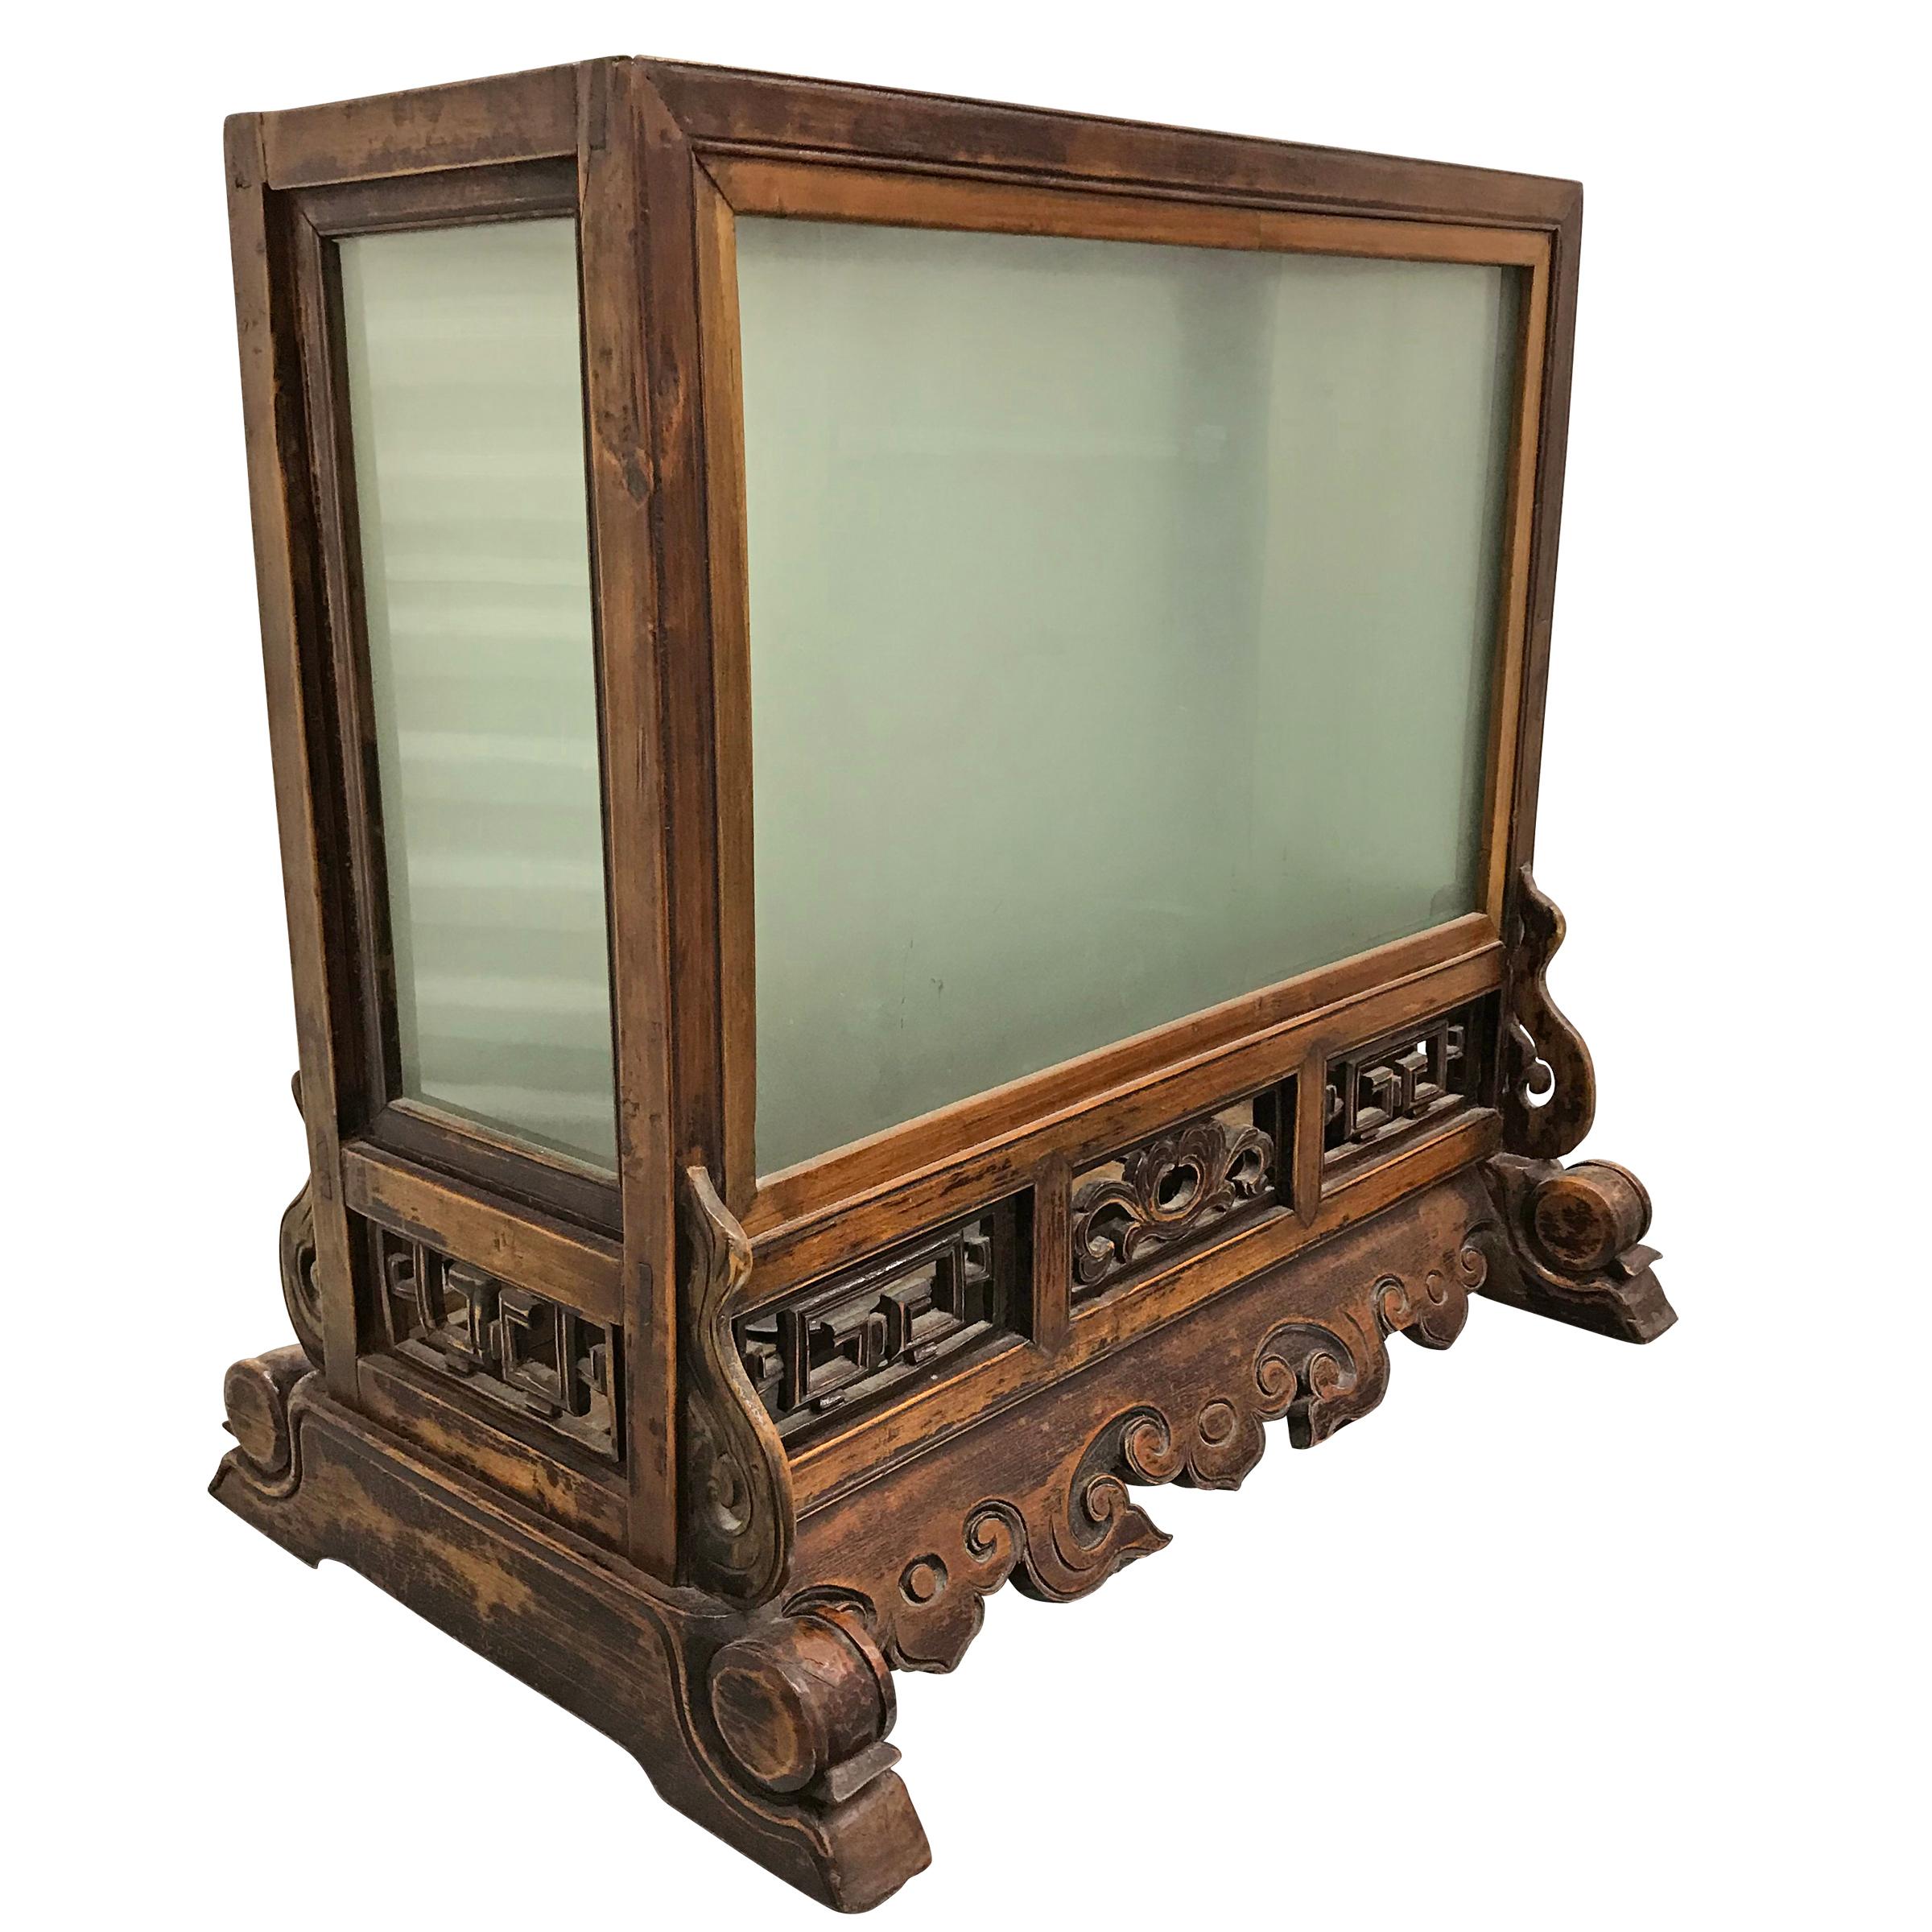 A 19th Century Chinese carved elmwood table lantern with floral carved apron, and platforms for three candles inside. The lantern would have originally had silk sides, but has been updated with frosted glass panels.